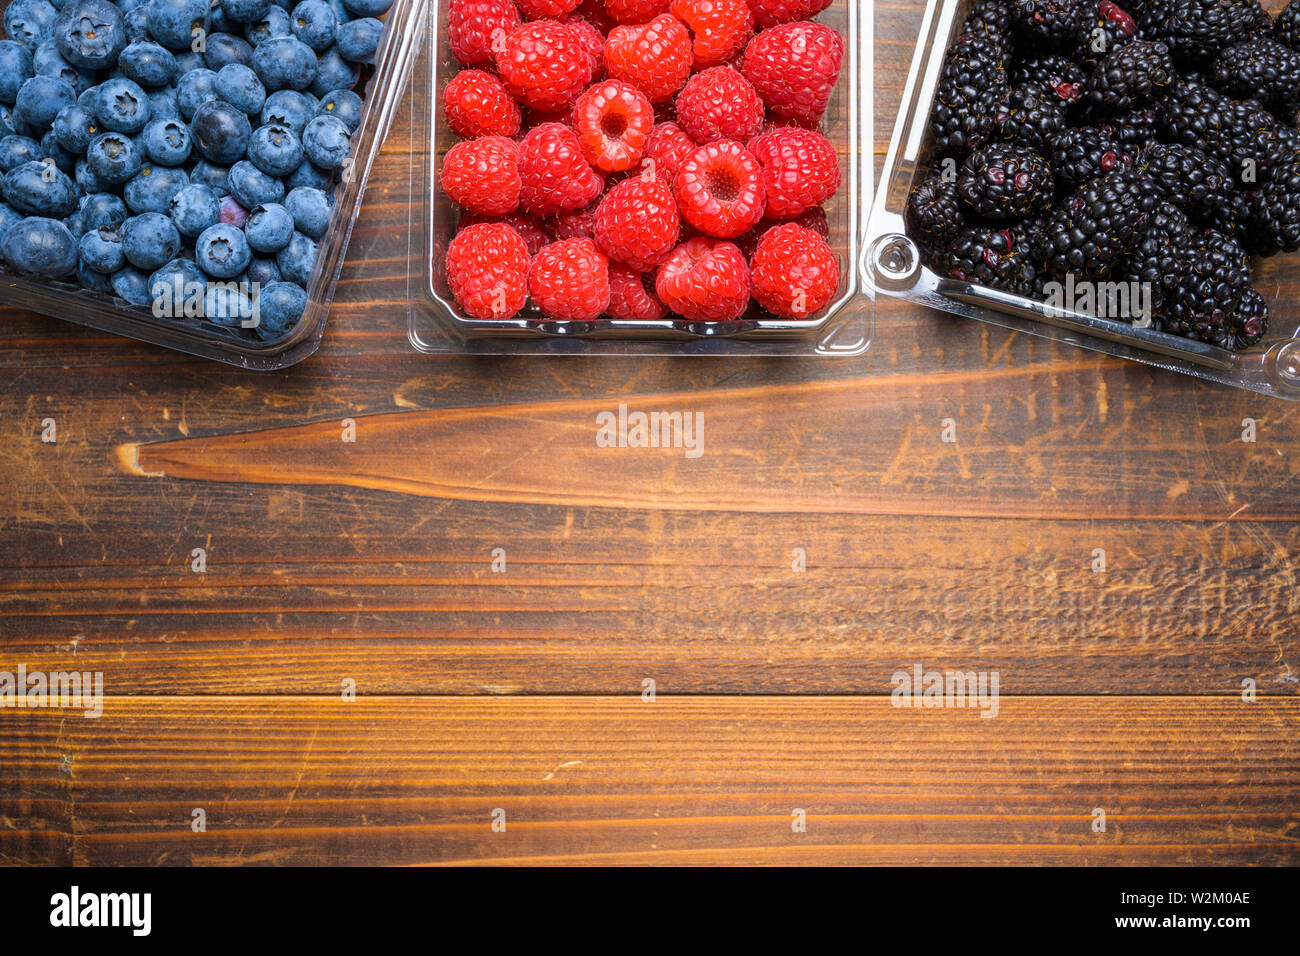 Assorted Berries on wood background Stock Photo